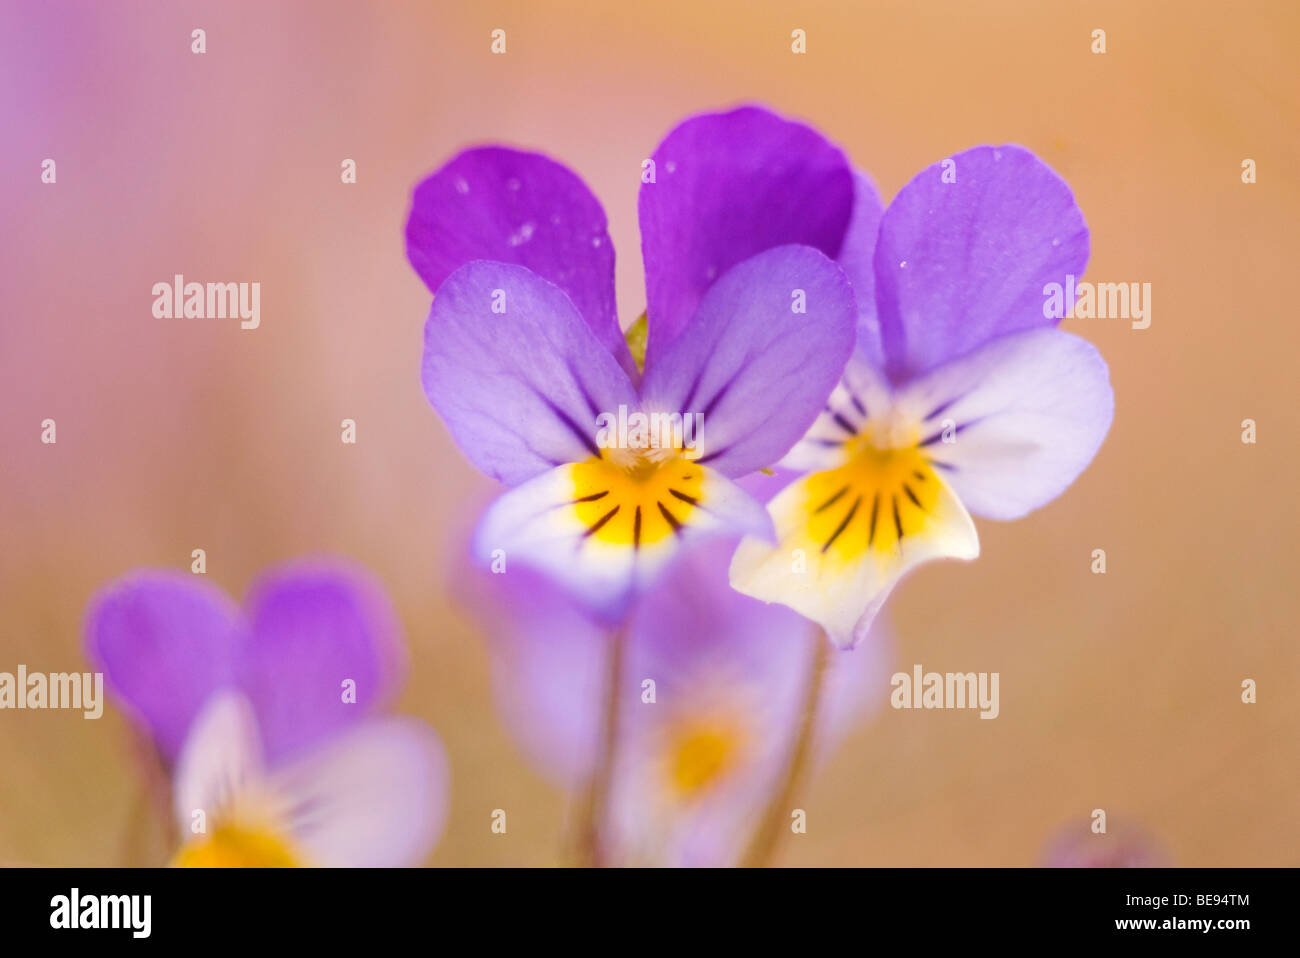 Mare pansy; Duinviooltje; Viola curtisii Foto Stock